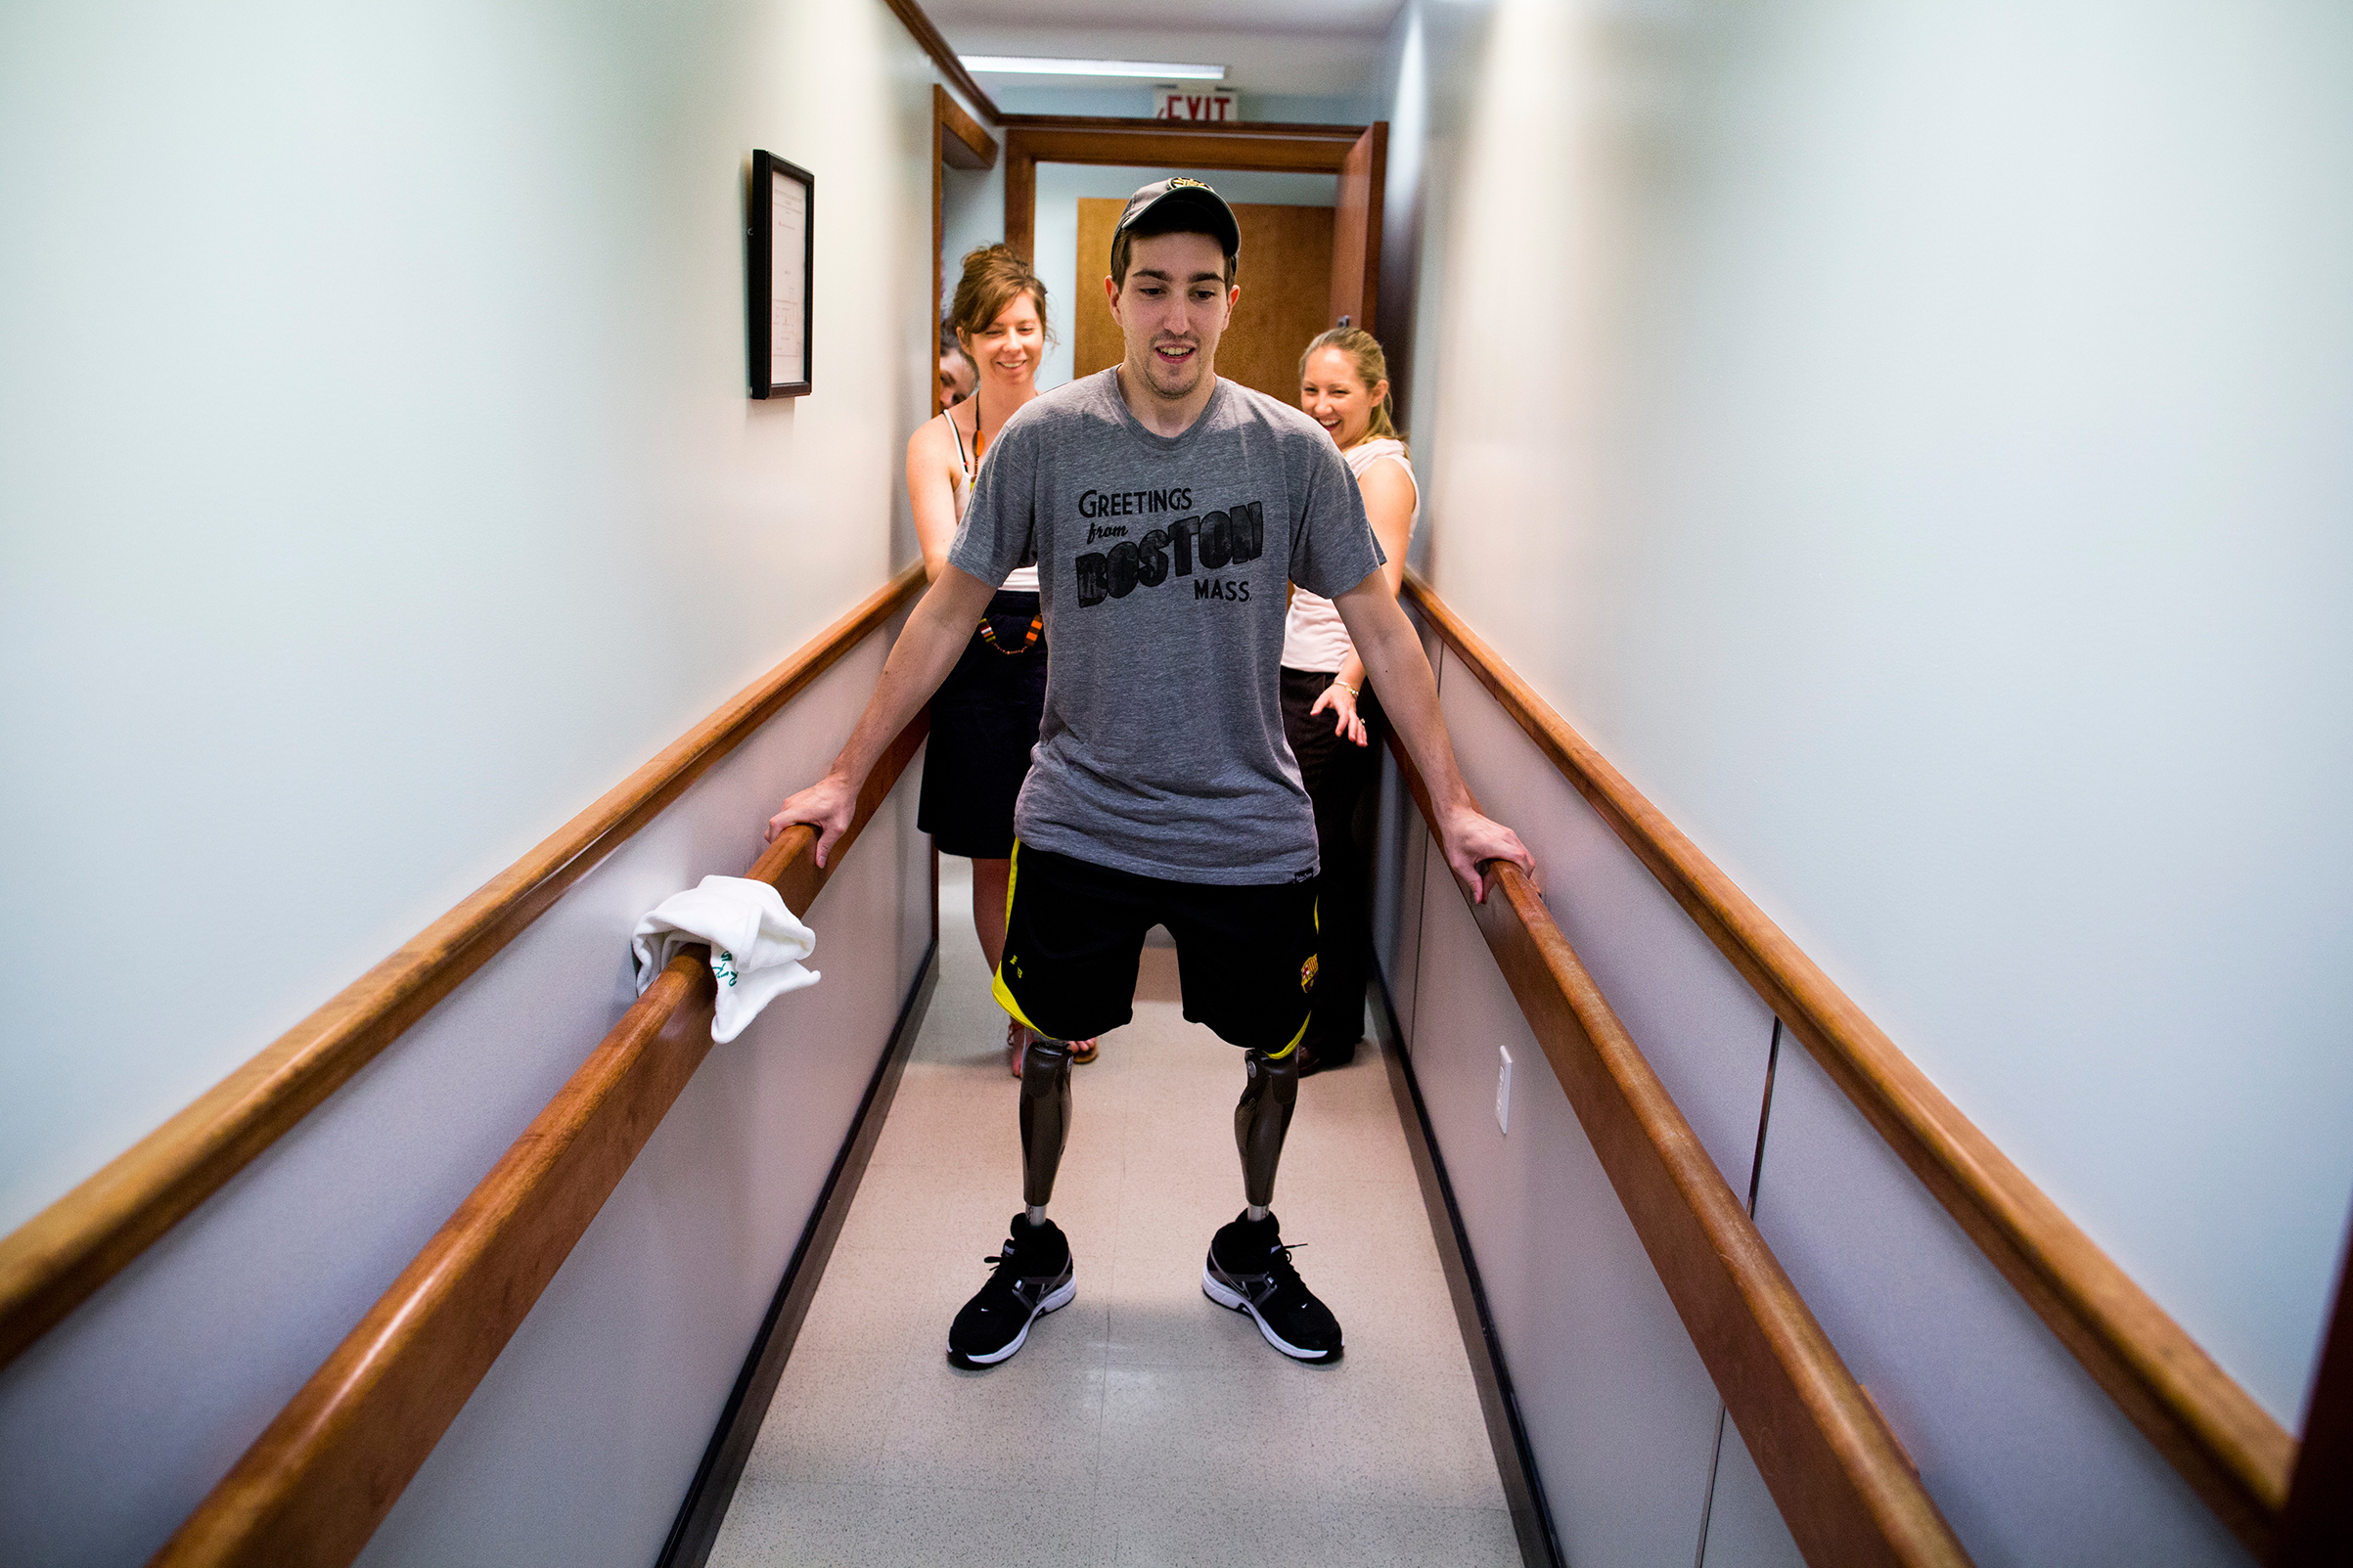 Bauman walks on his own for the first time since the marathon at a final fitting for his prosthetic legs in Massachusetts on May 31, 2013. (Josh Haner—The New York Times/Redux)